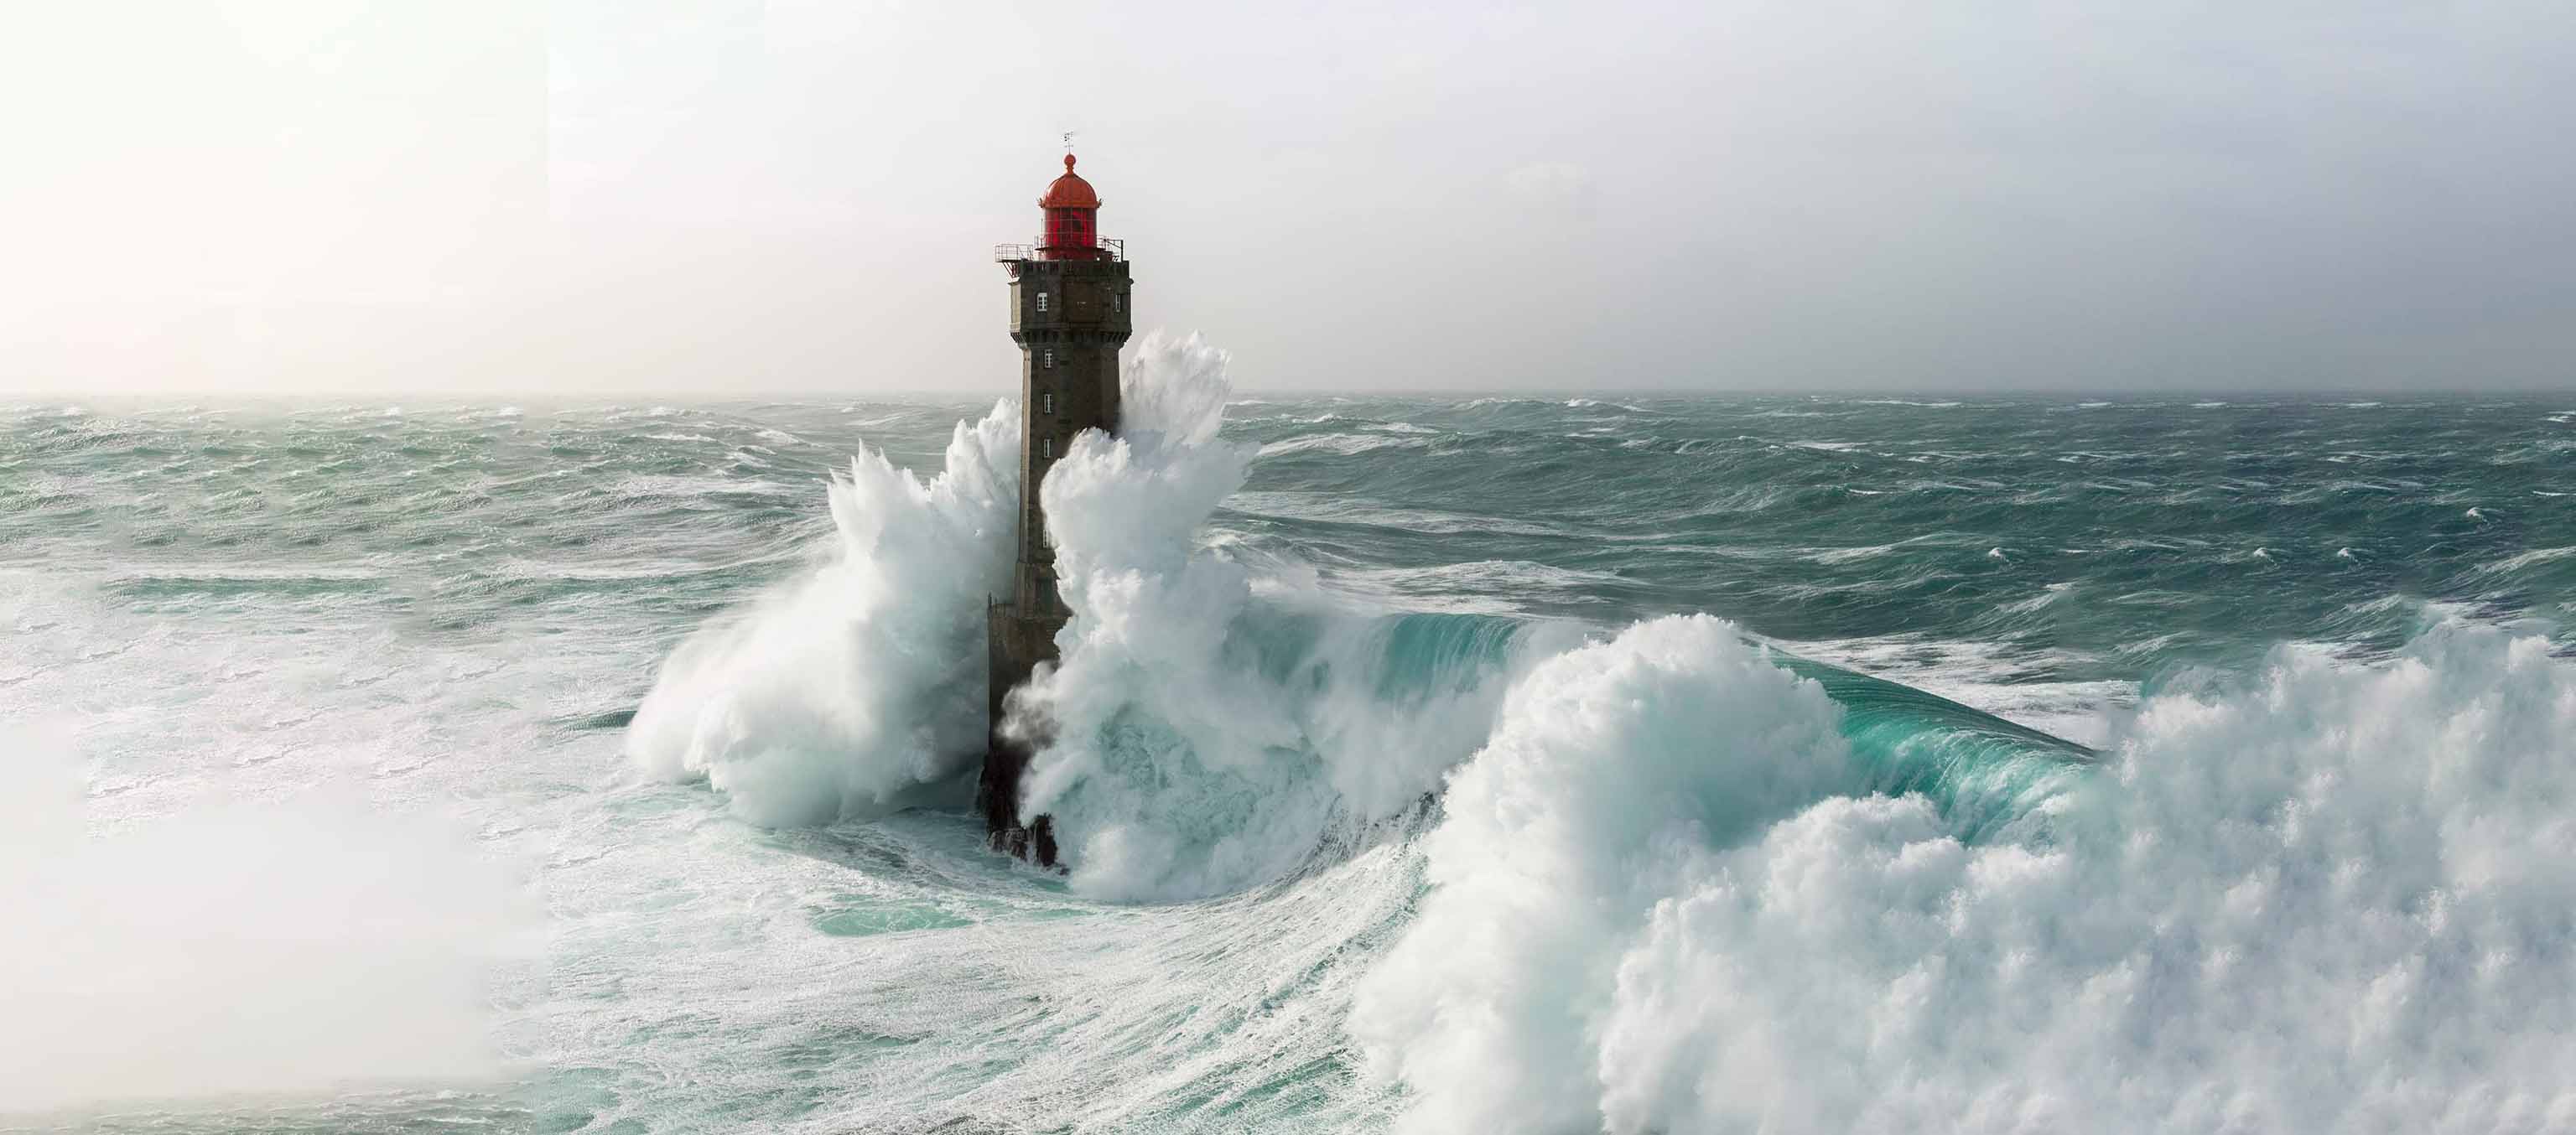 Lighthouse in choppy waters